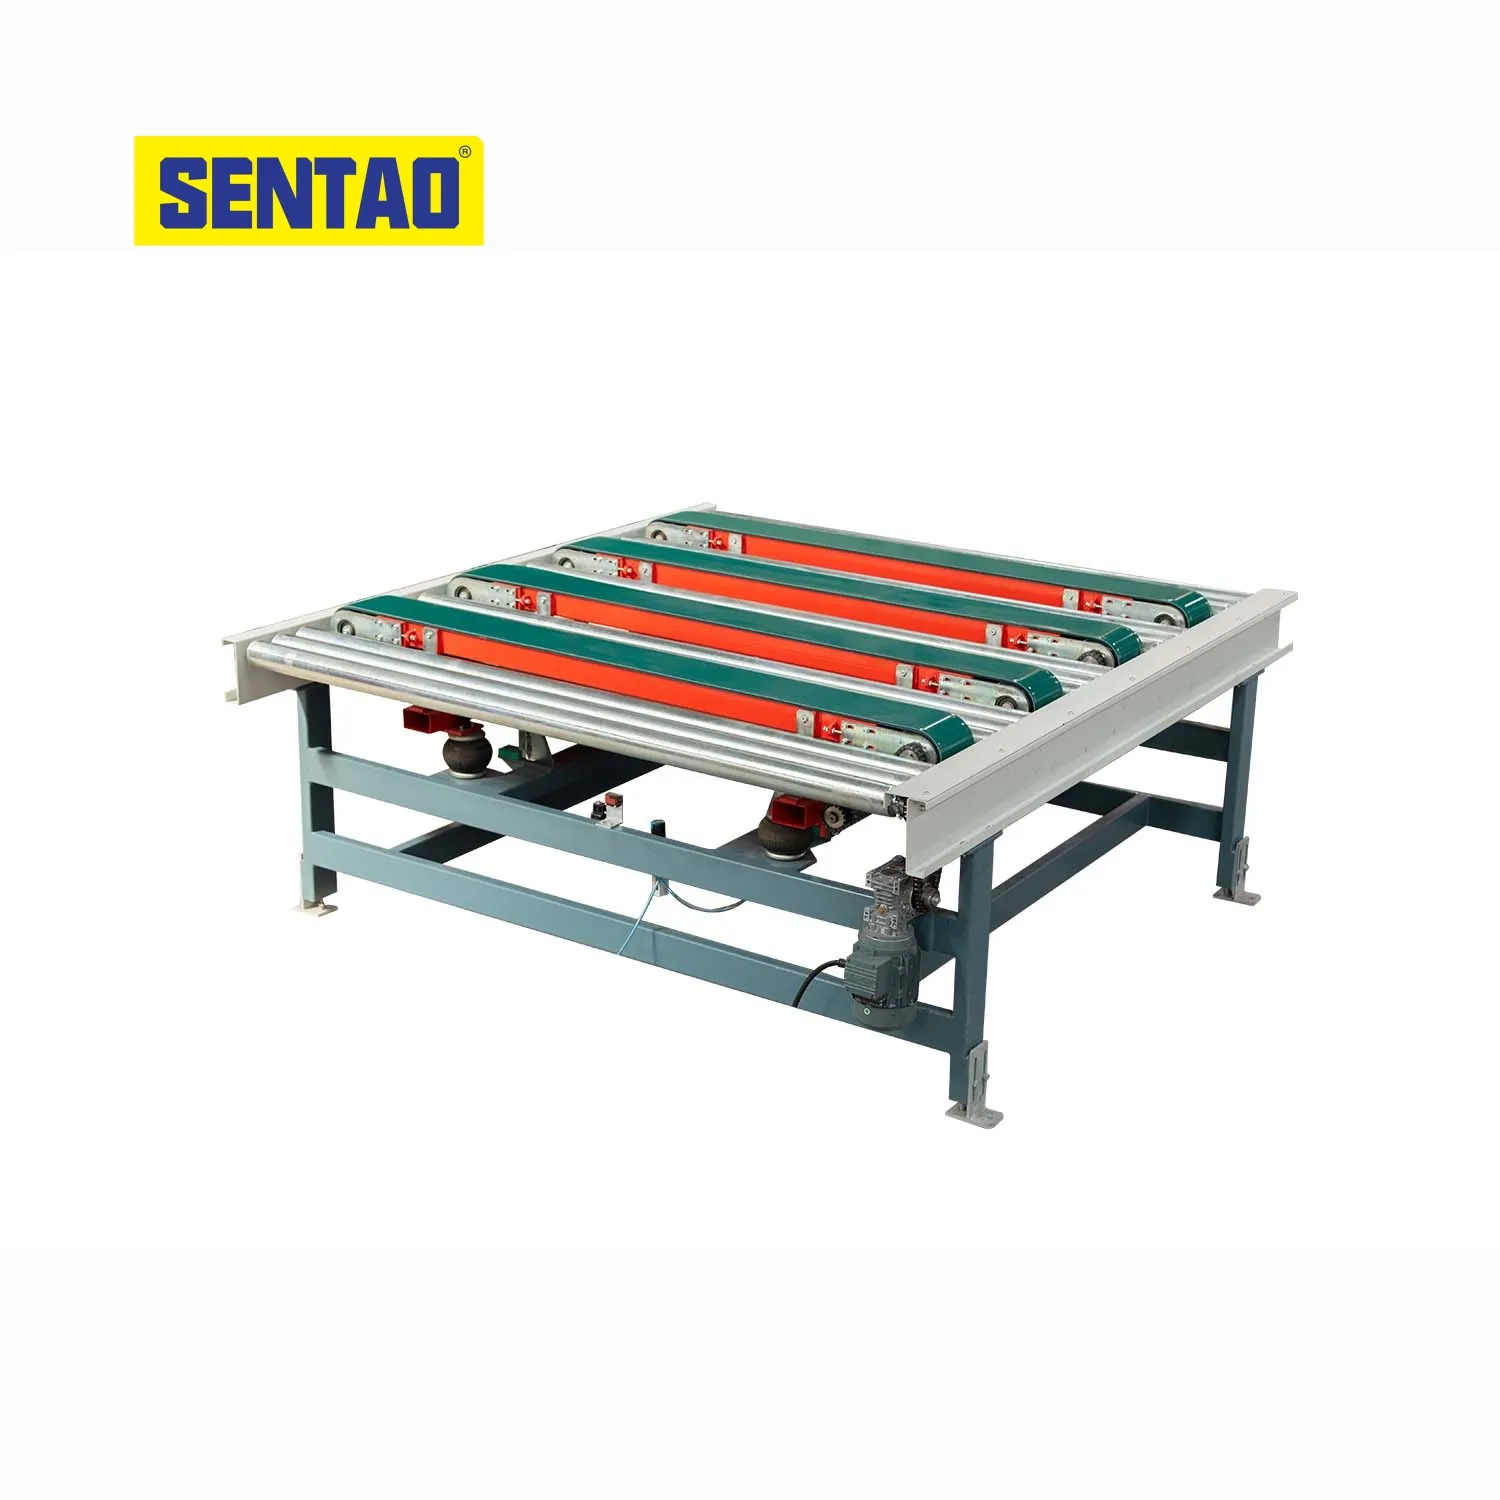 SENTAO Specialized manufacturer for over 30 years Newly designed automated production line for mattresses